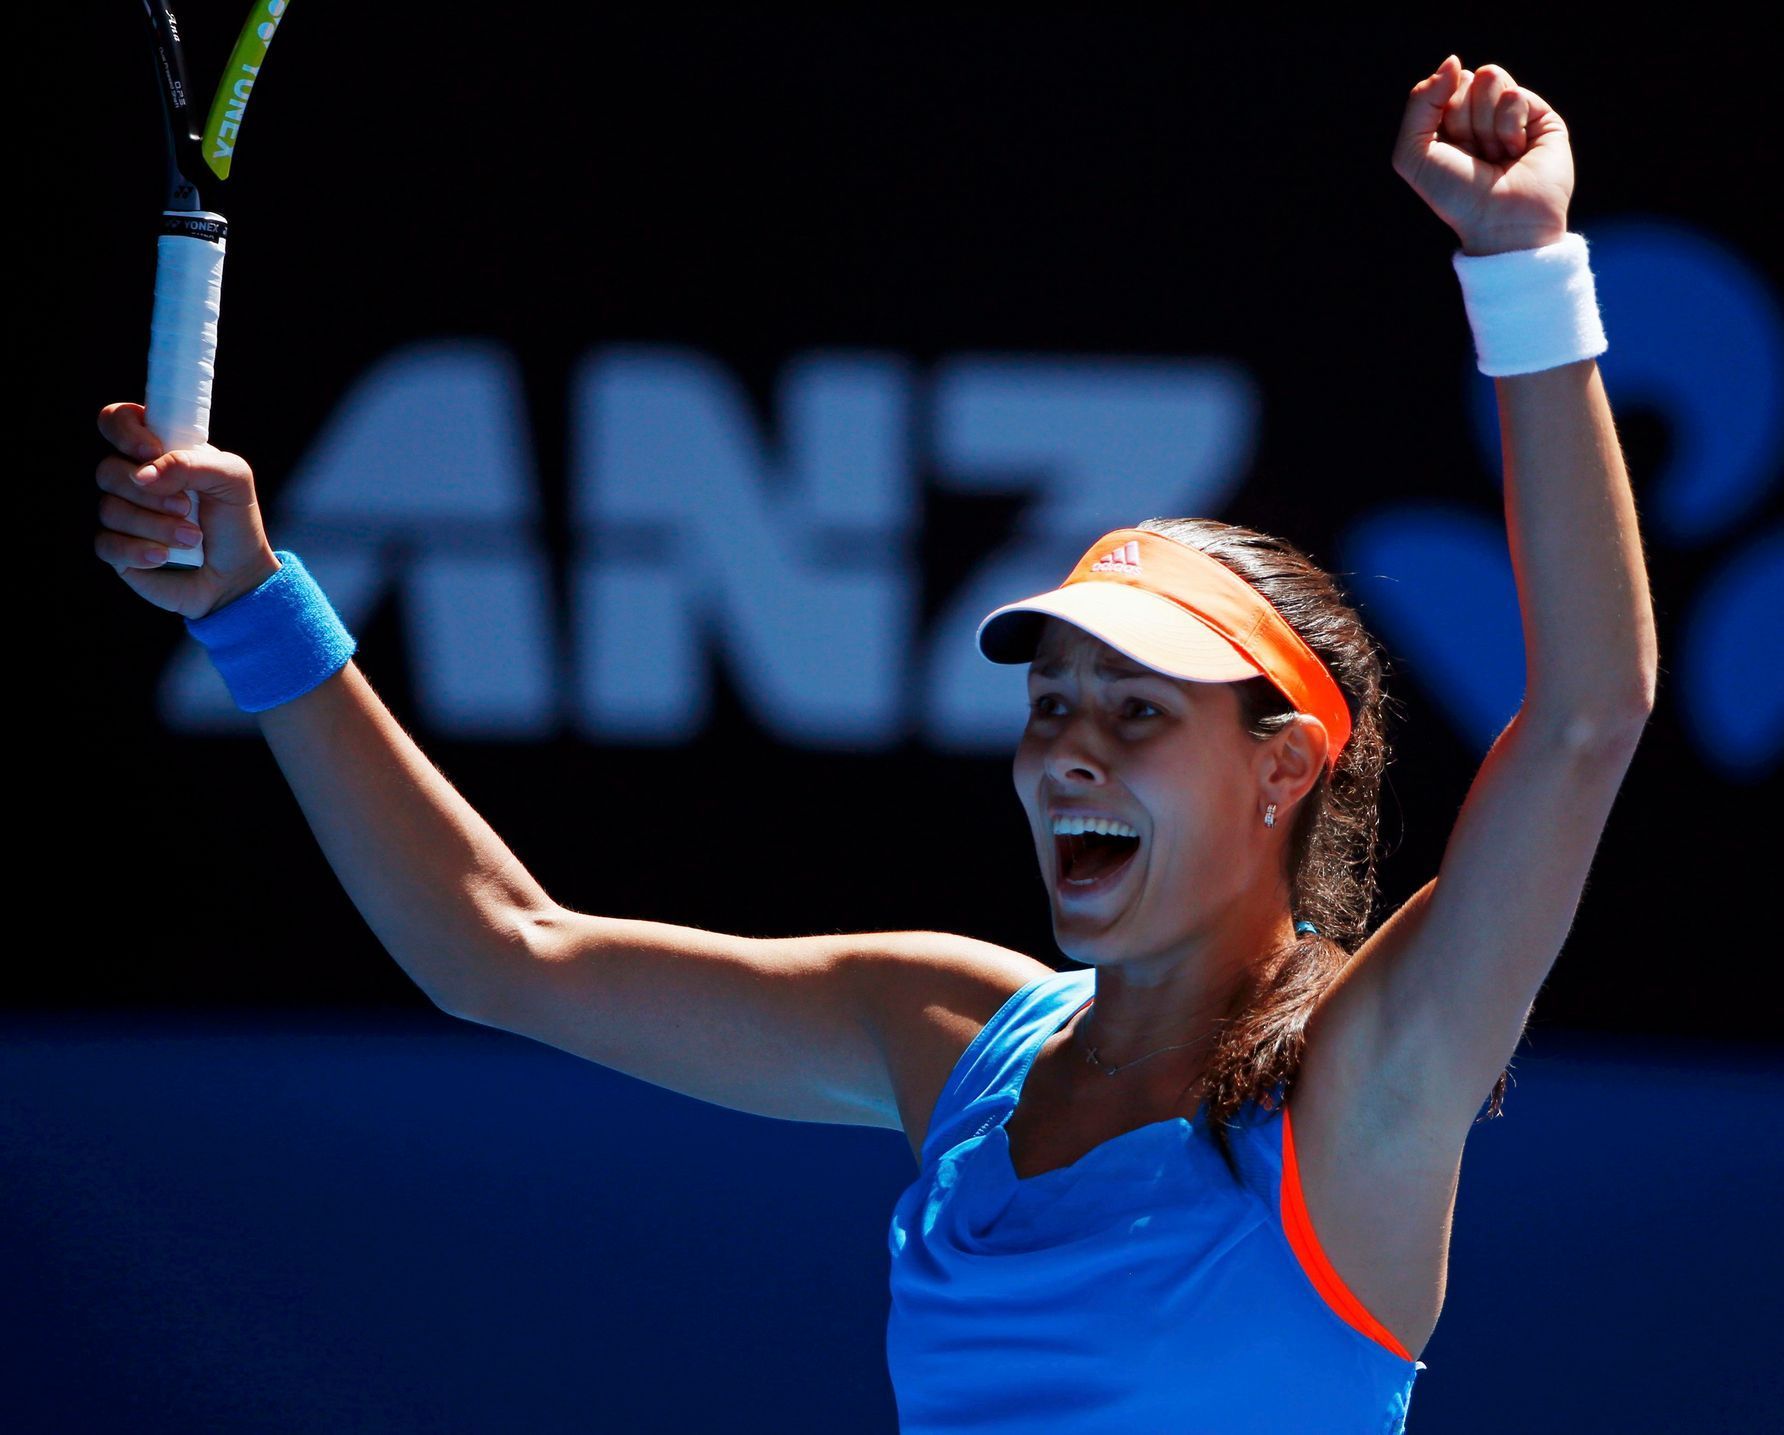 Ana Ivanovic of Serbia celebrates defeating Serena Williams of the U.S. in their women's singles match at the Australian Open 2014 tennis tournament in Melbourne